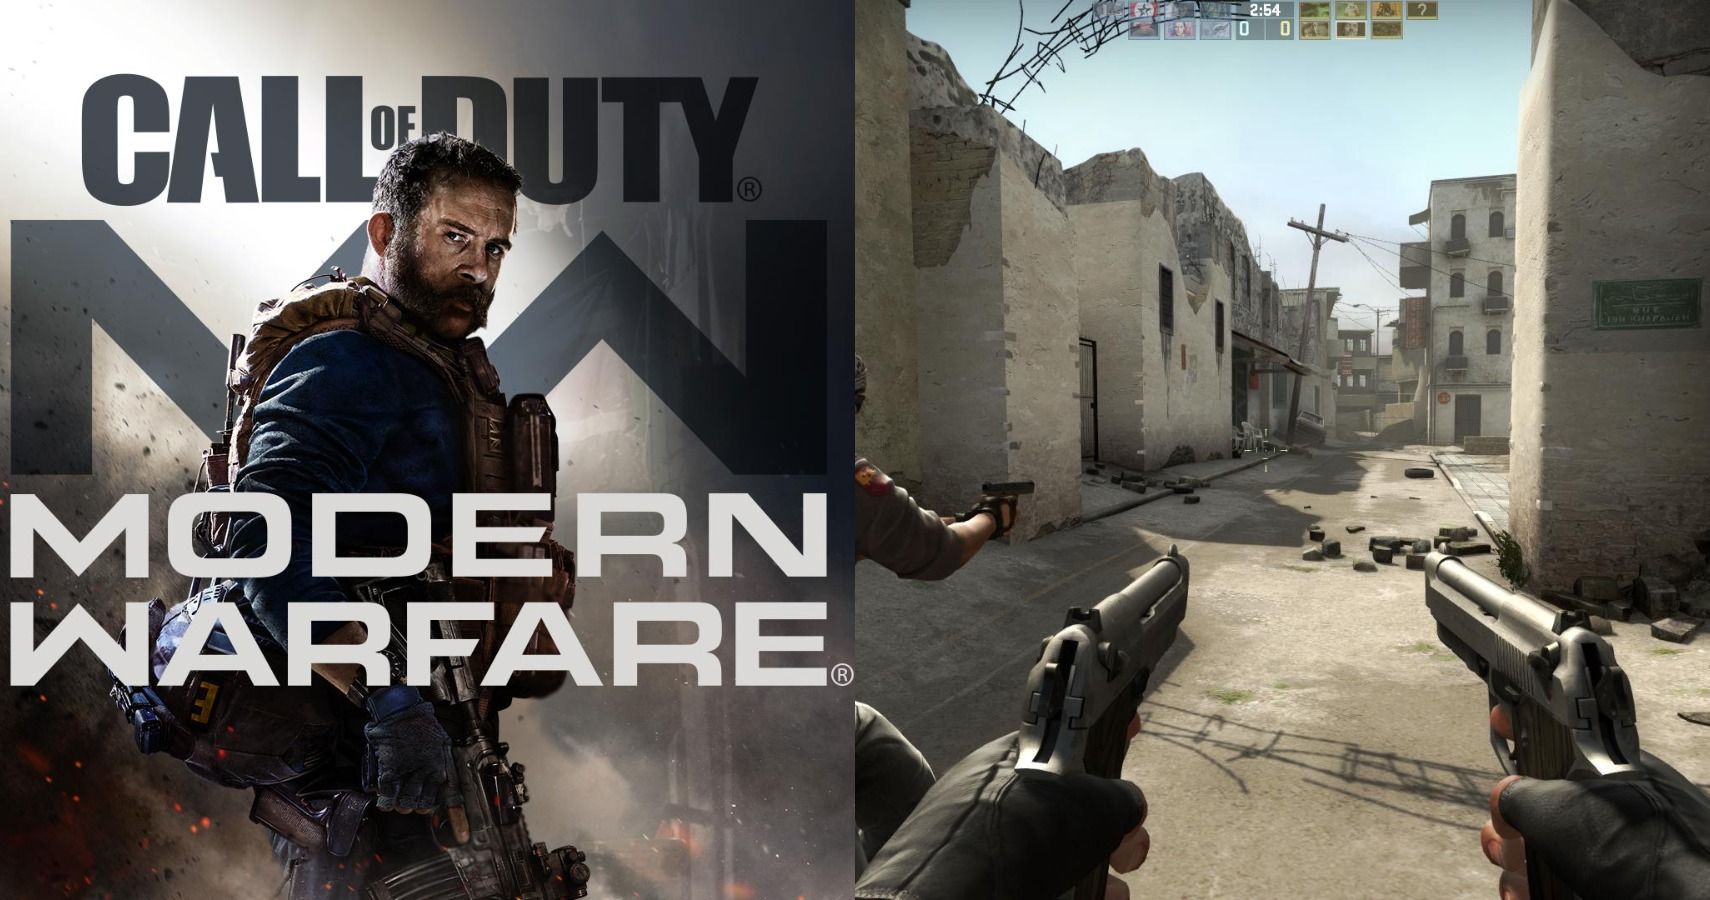 15 First Person Shooters To Play If You Like Call Of Duty Modern Warfare